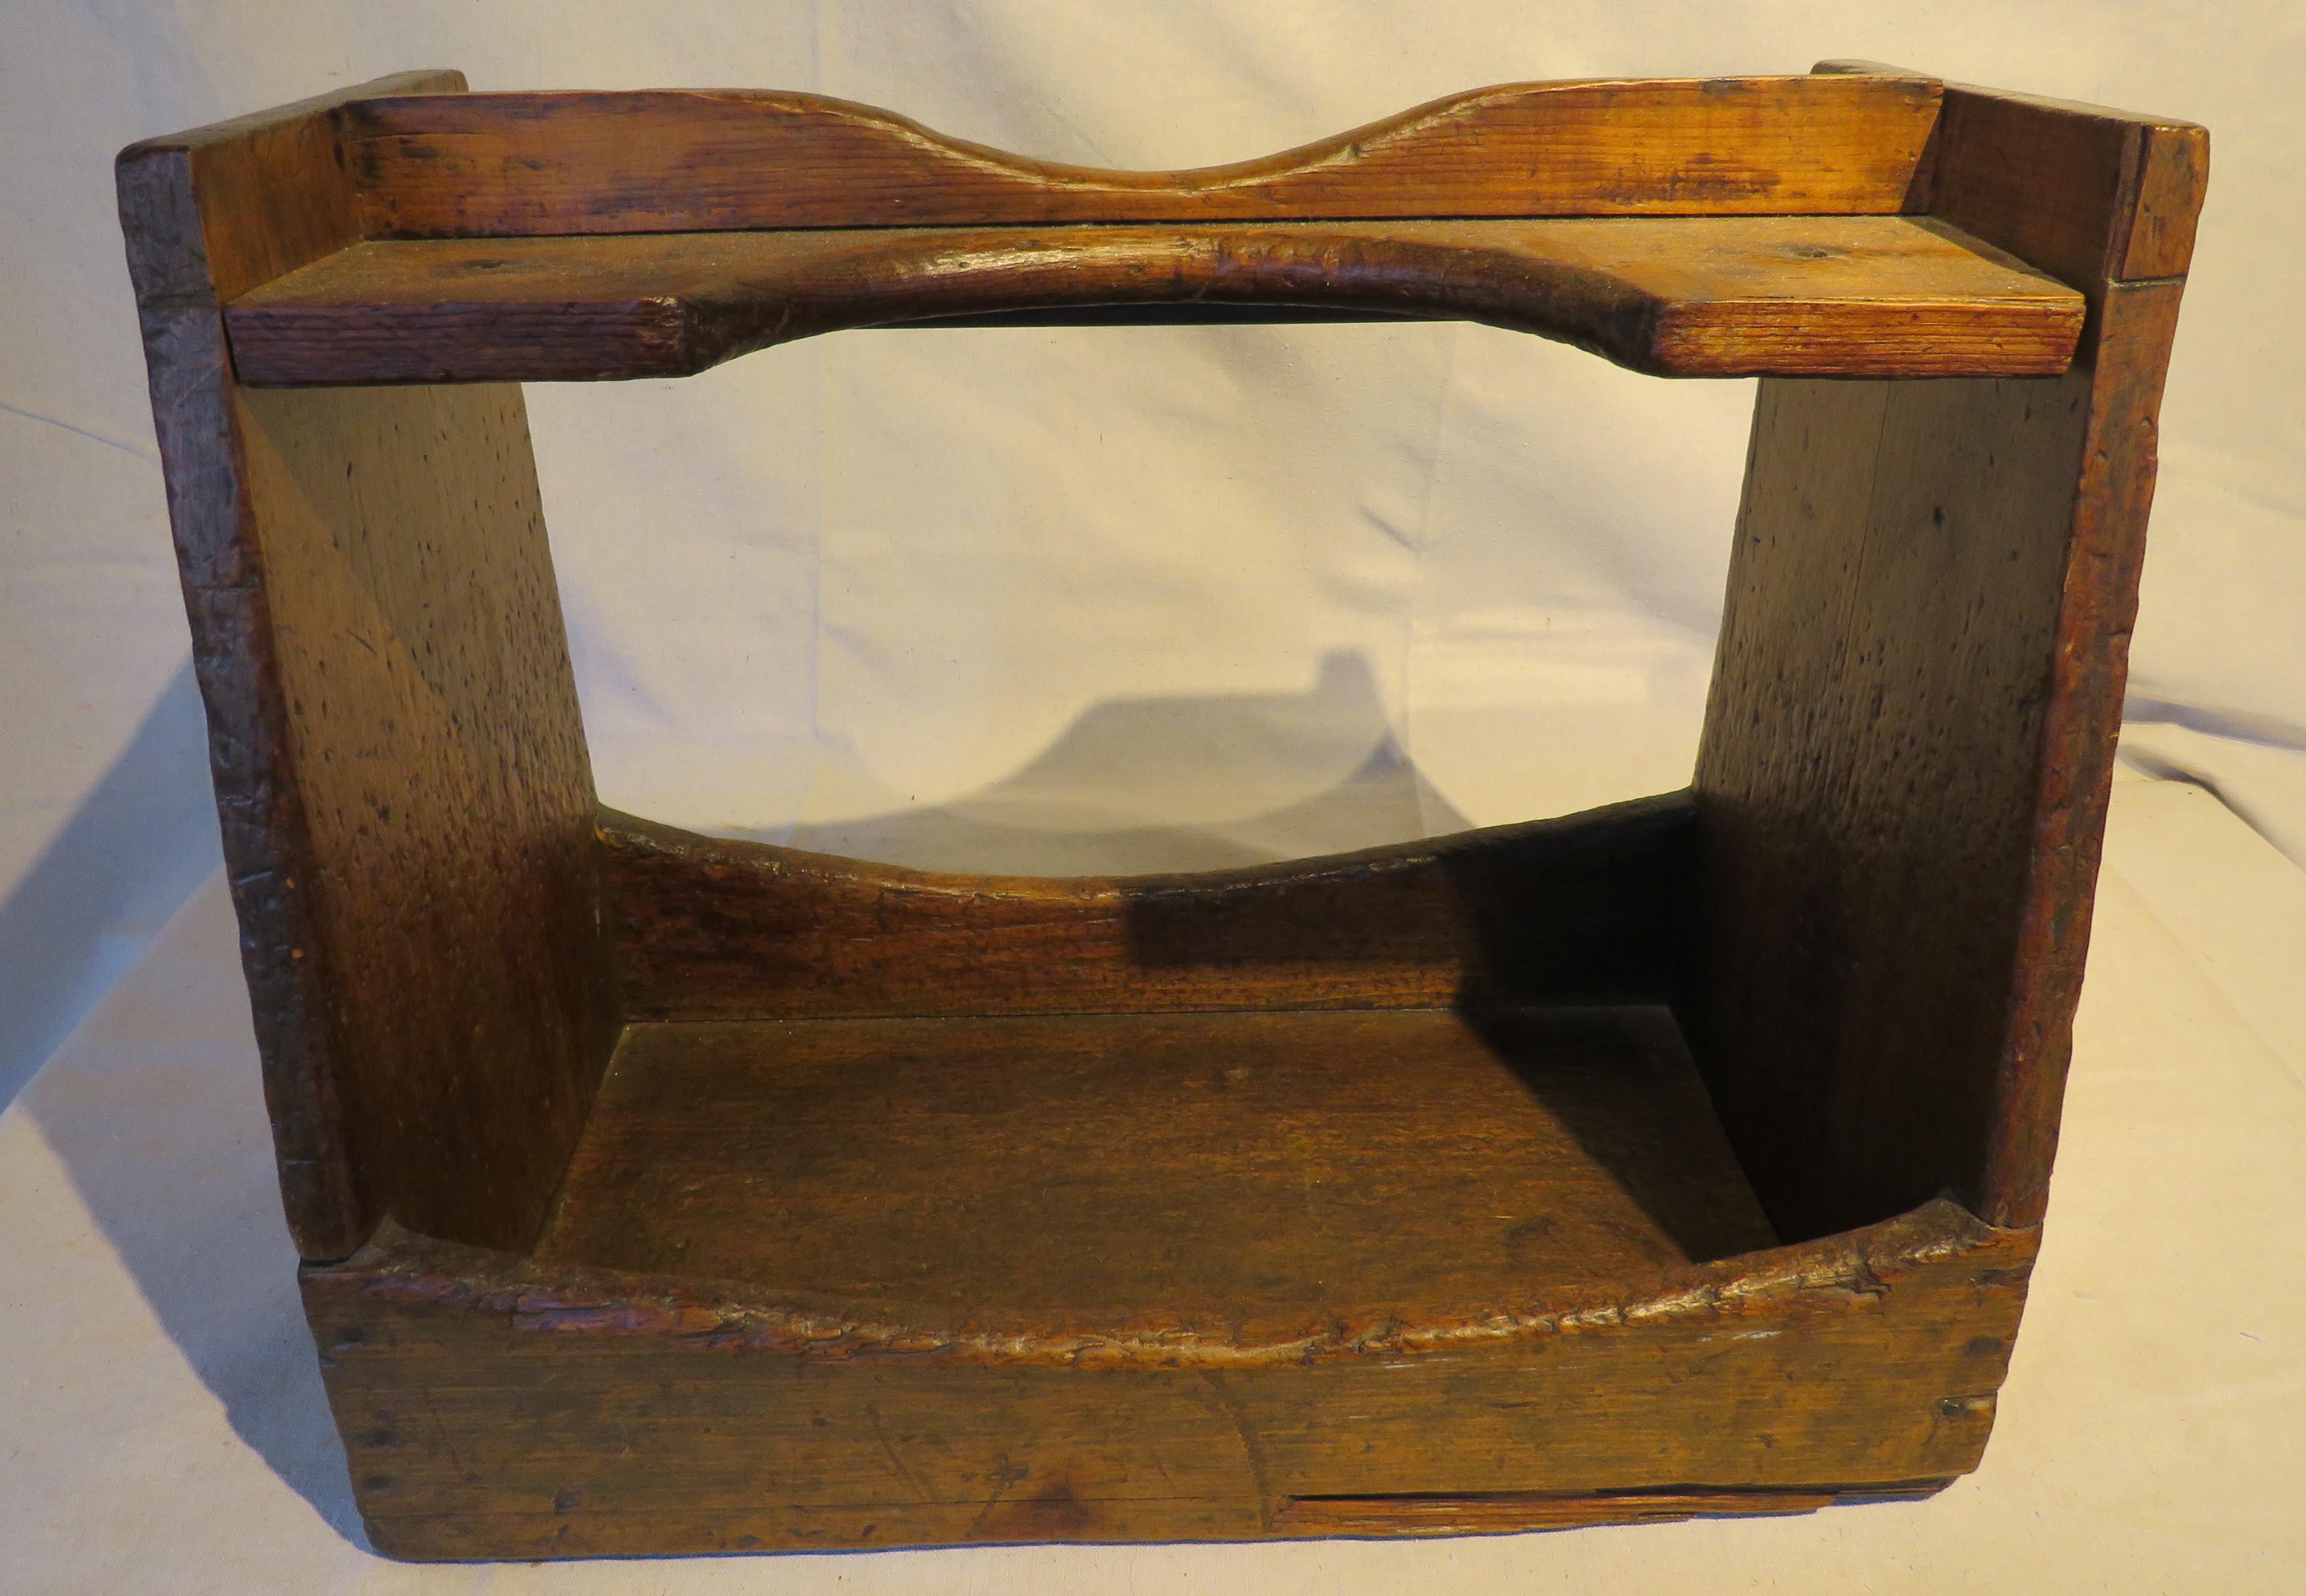 19th century pine farrier's tray, Quebec, Canada. With sturdy construction and nice mellow patina. Great magazine/newspaper rack.